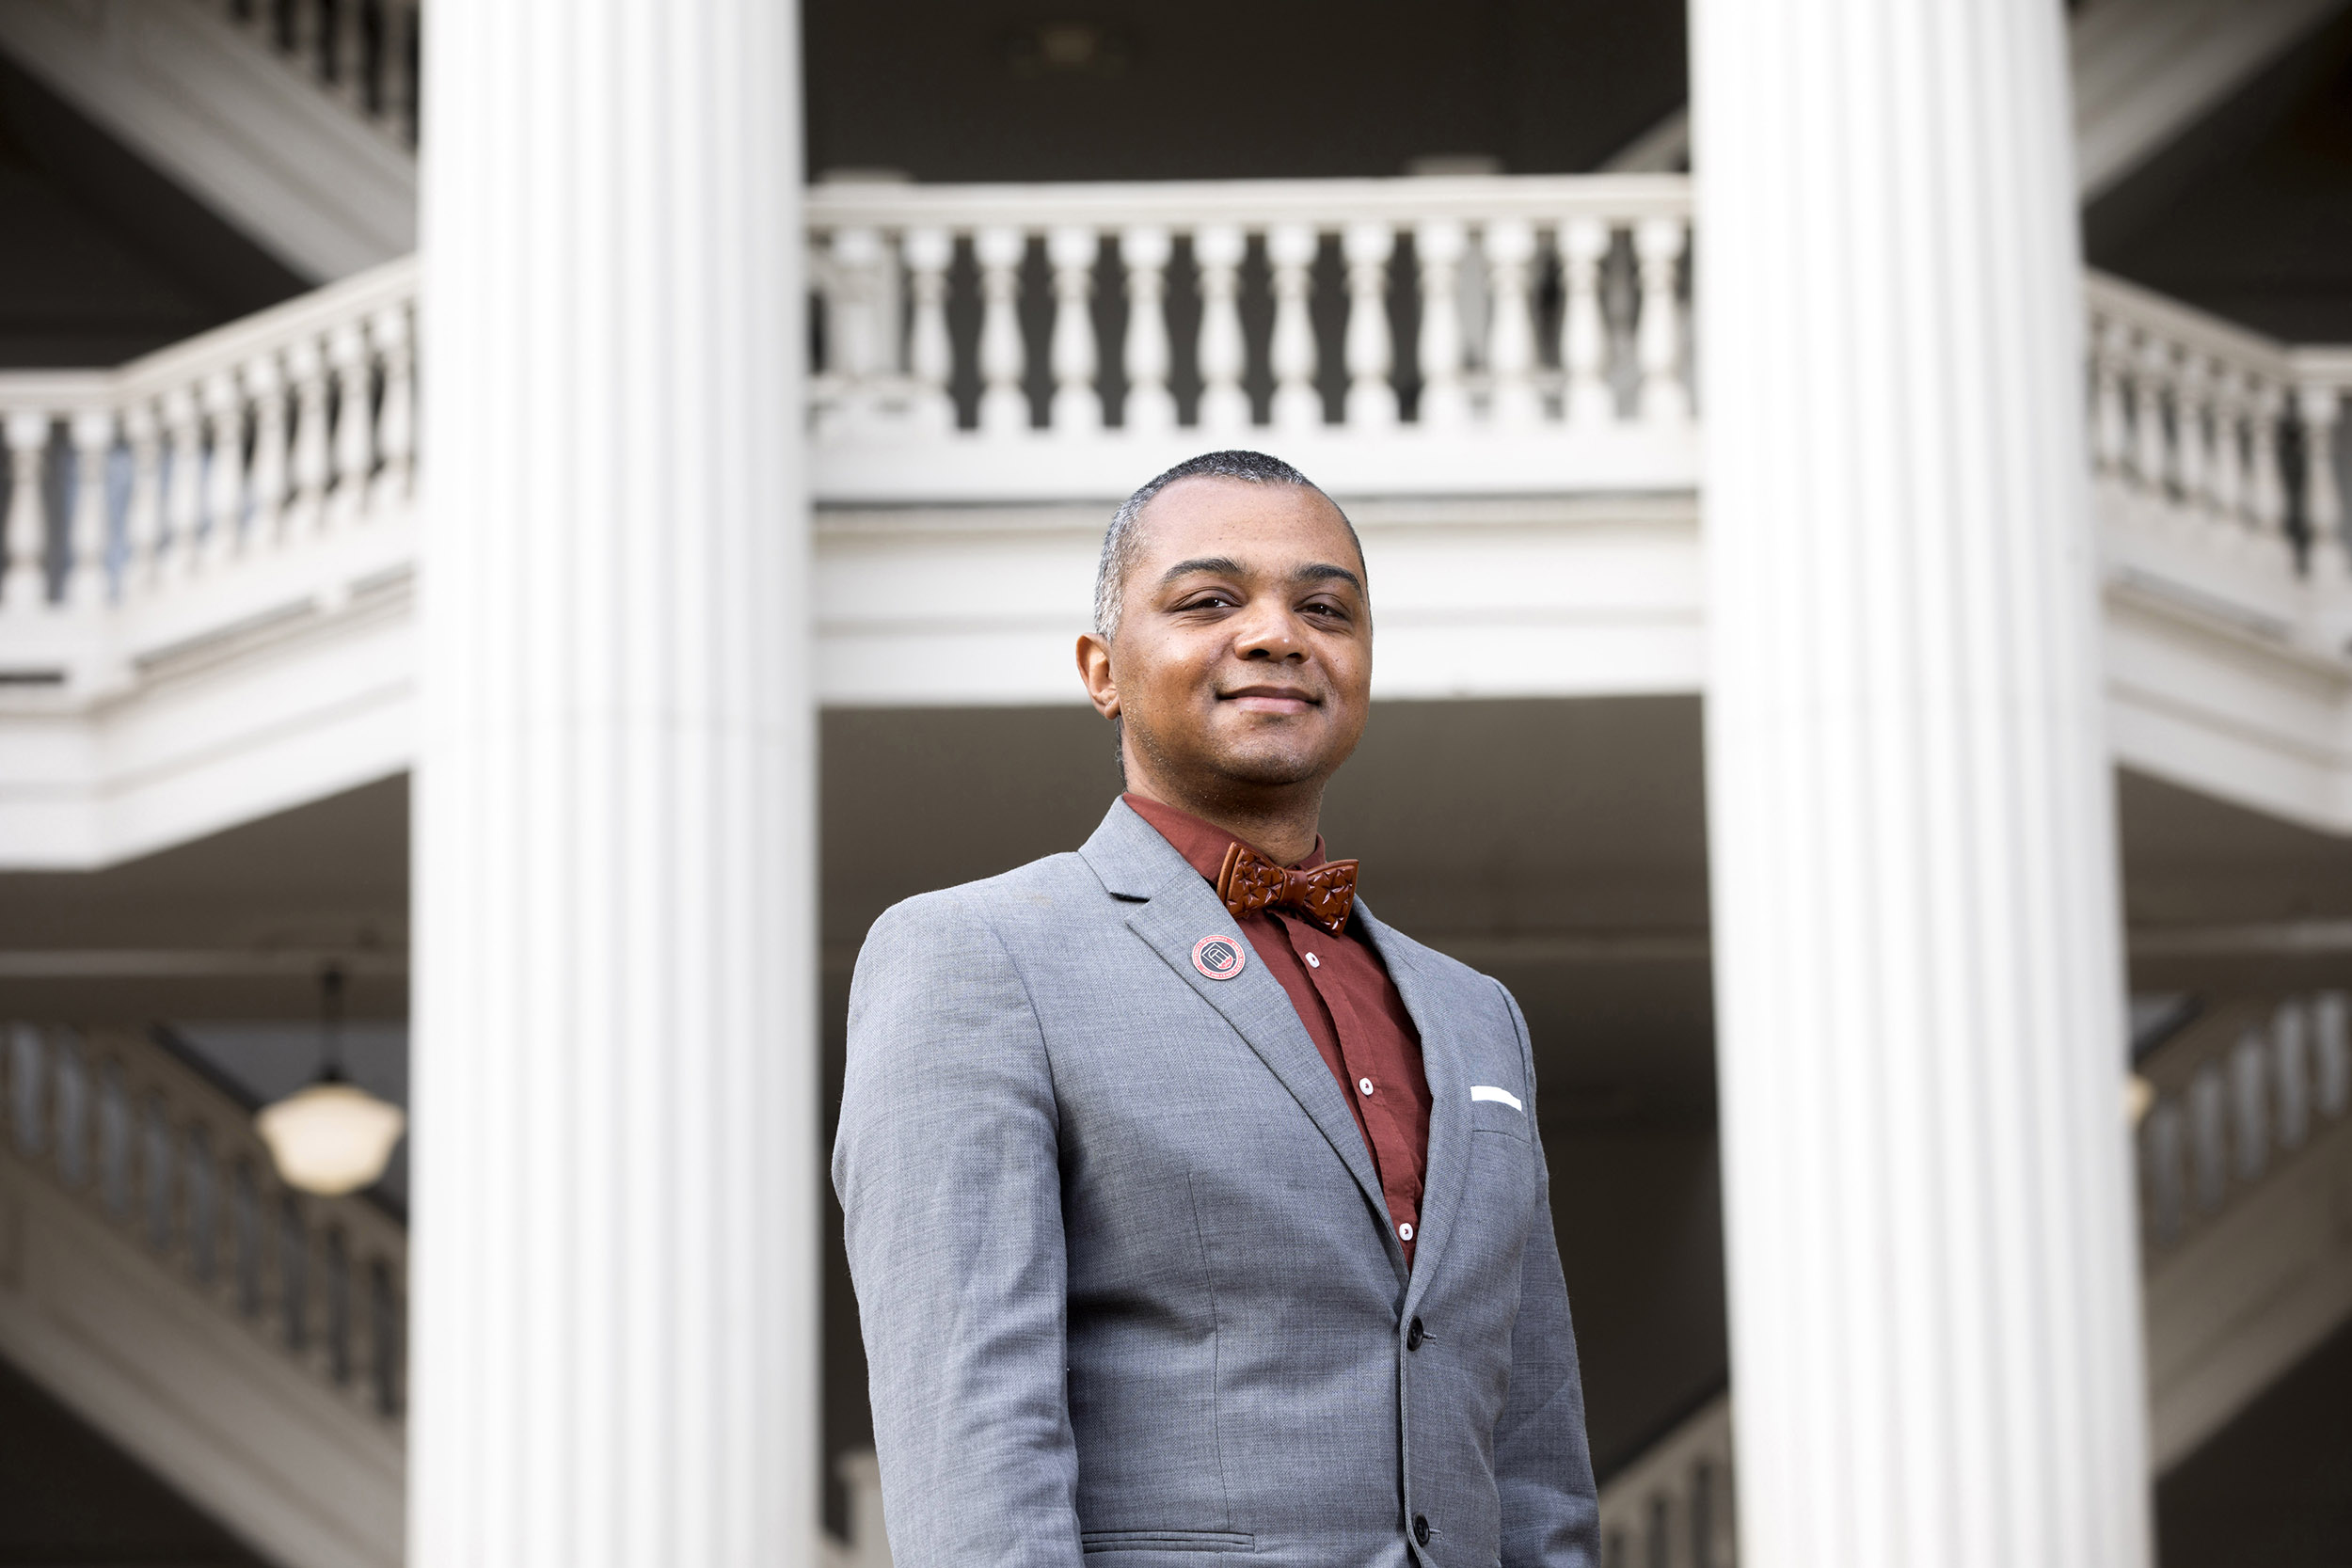 Graduate student helps others achieve their dreams - UGA Today